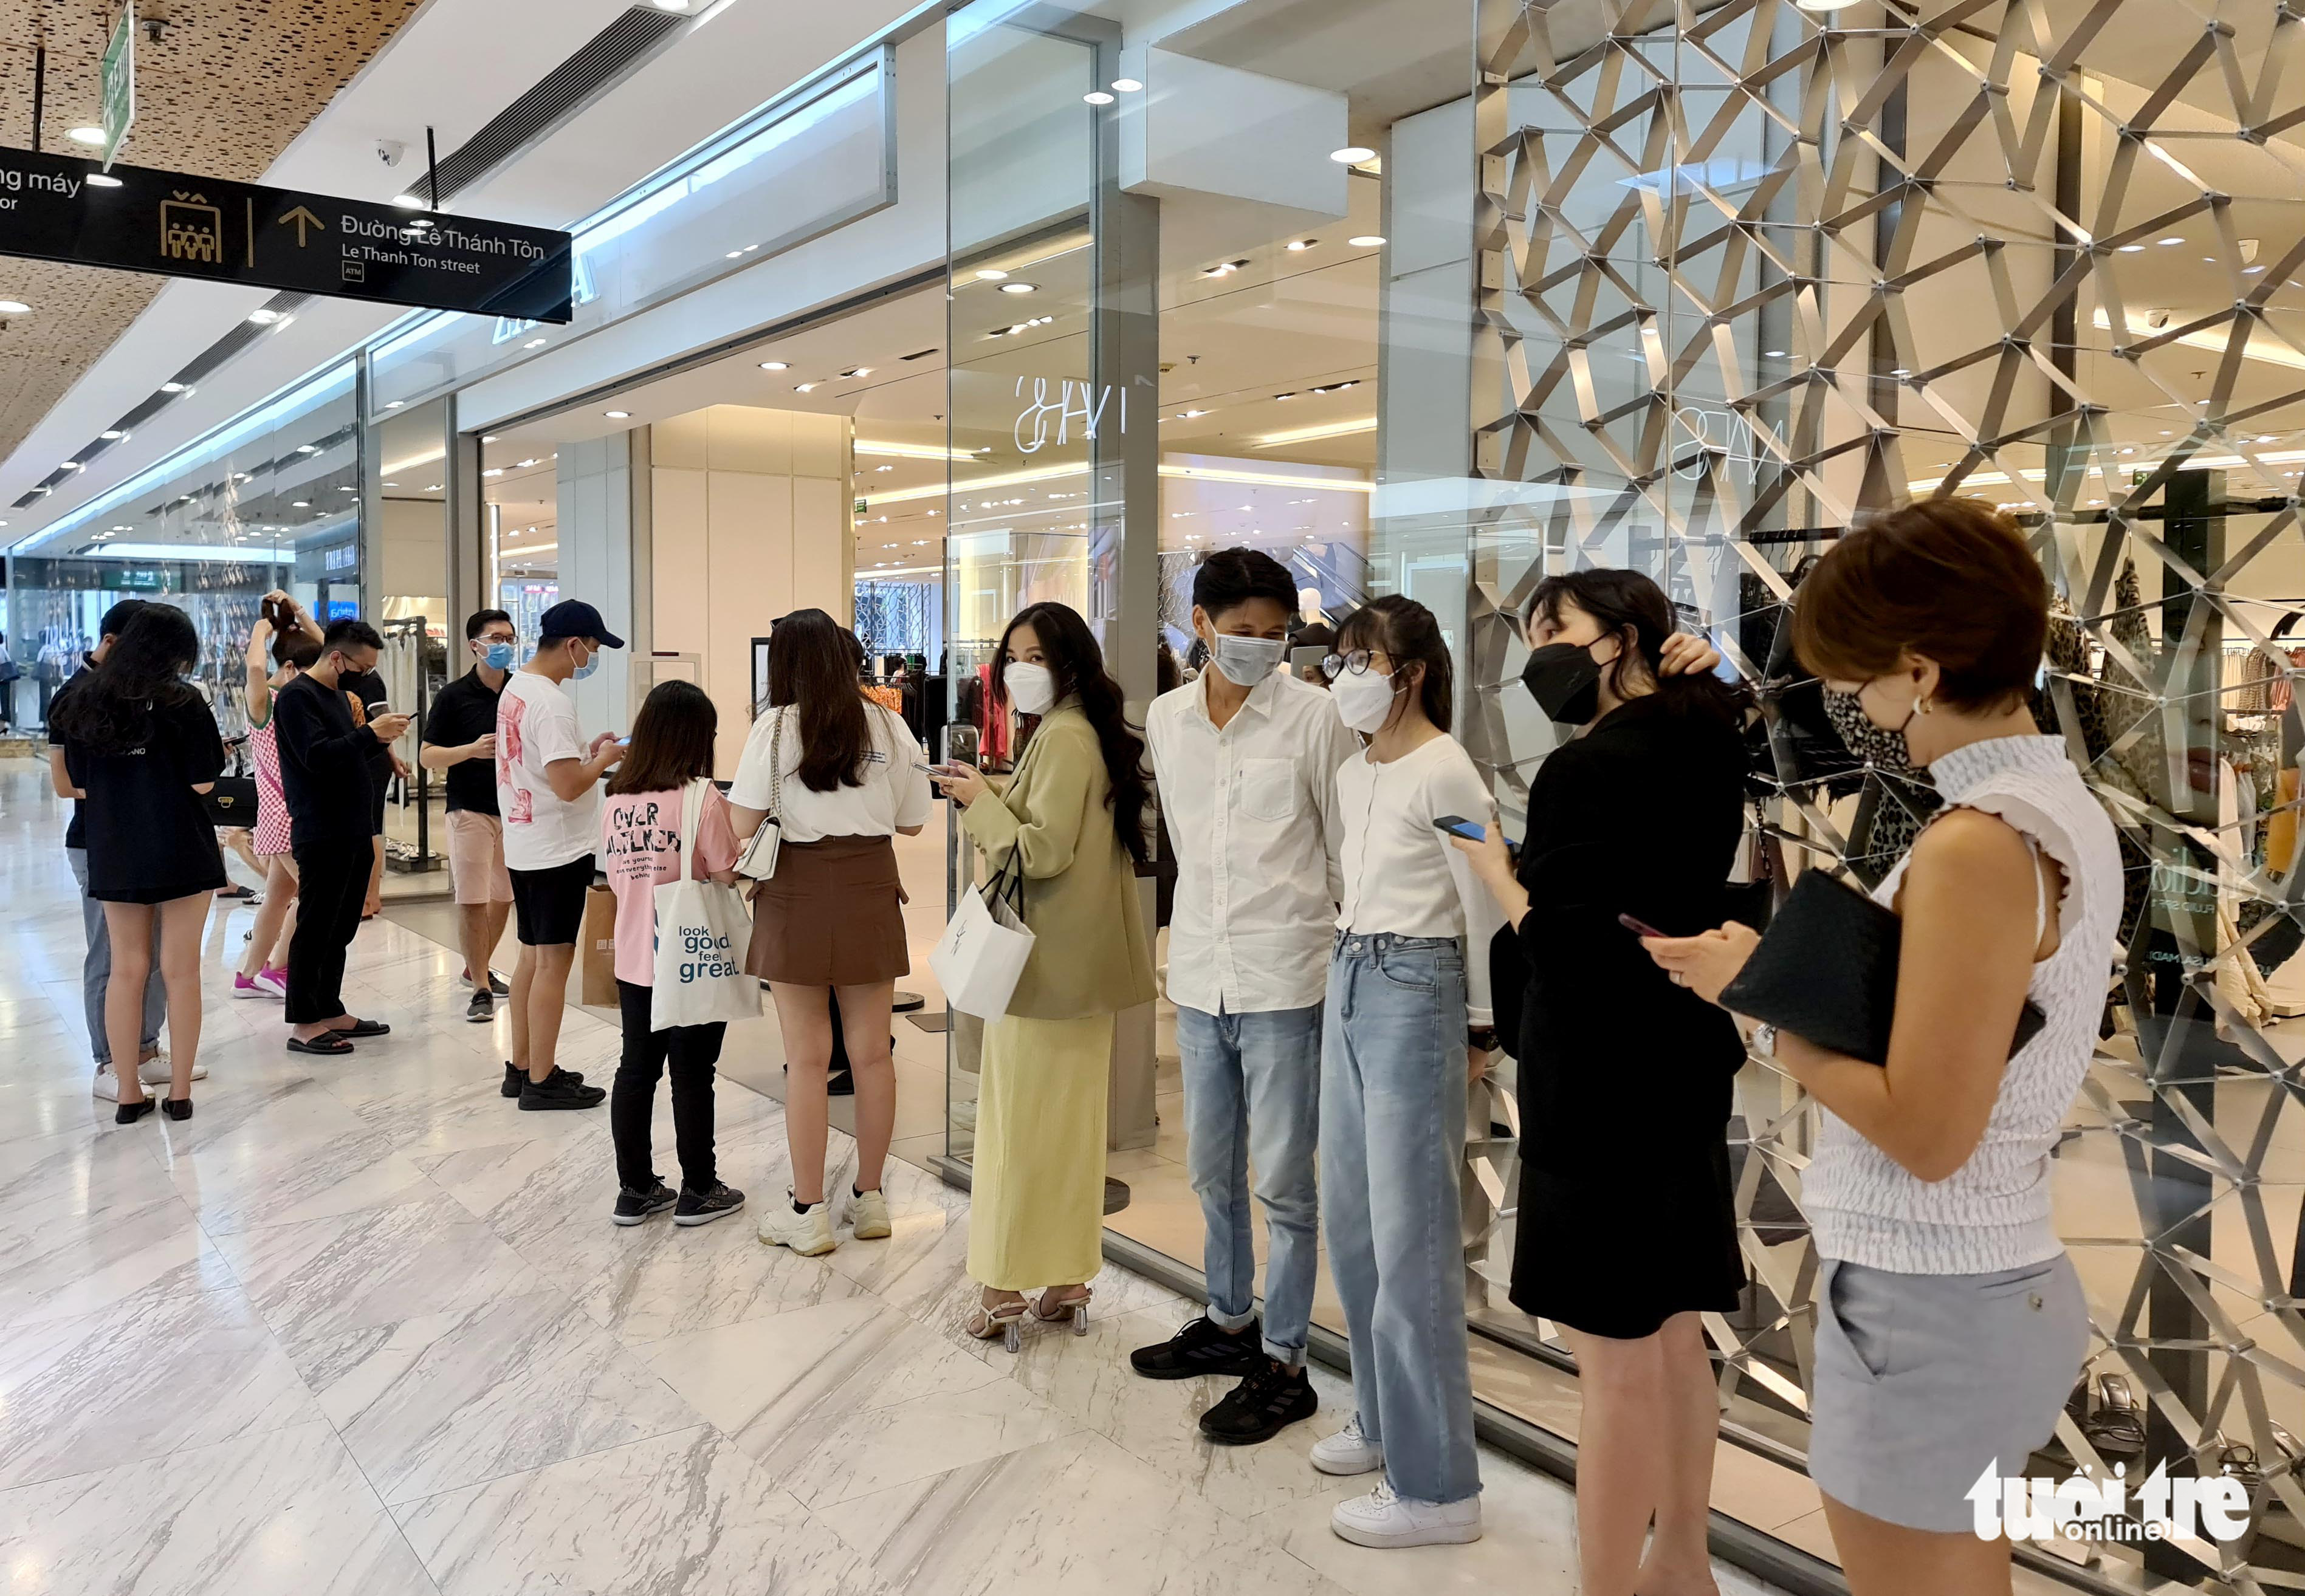 People queue up in front of a fashion store inside a shopping mall in Ho Chi Minh City, October 16, 2021. Photo: Ngoc Hien / Tuoi Tre